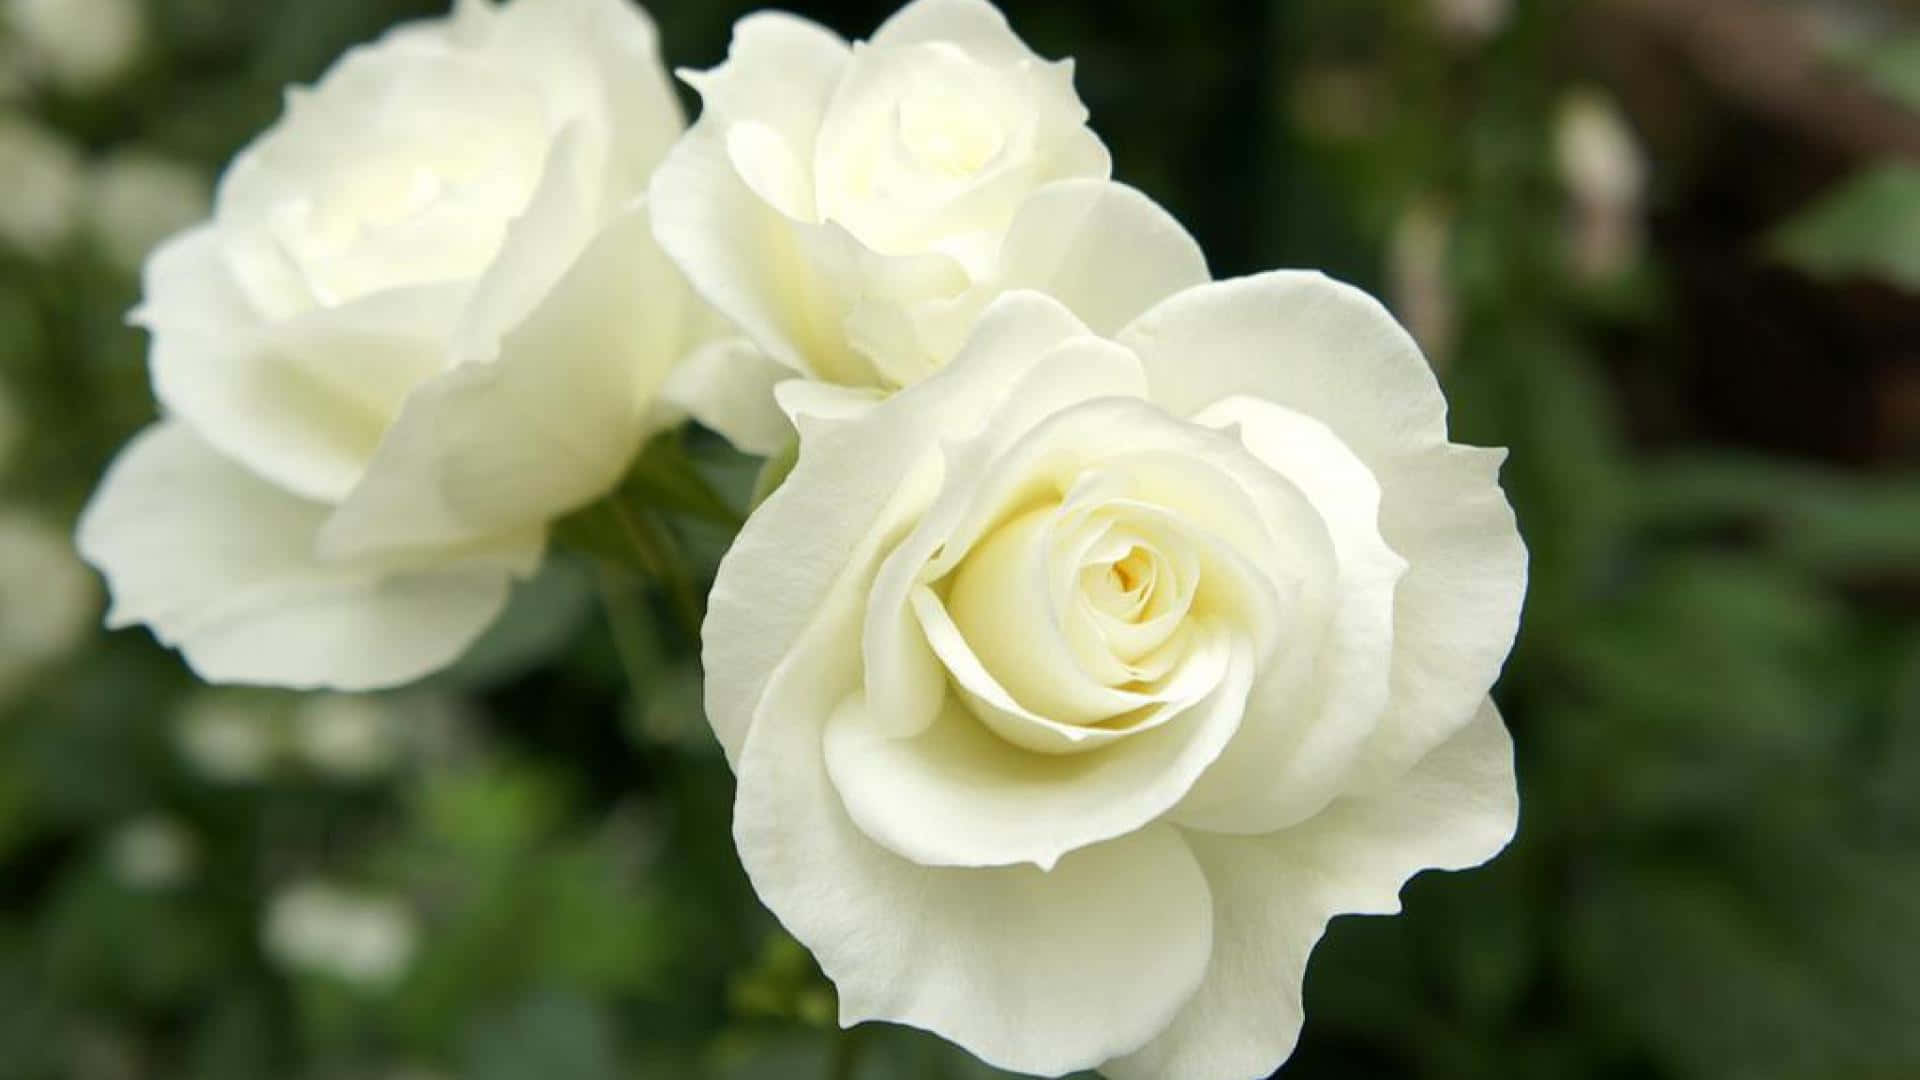 “the Beauty Of A White Rose”